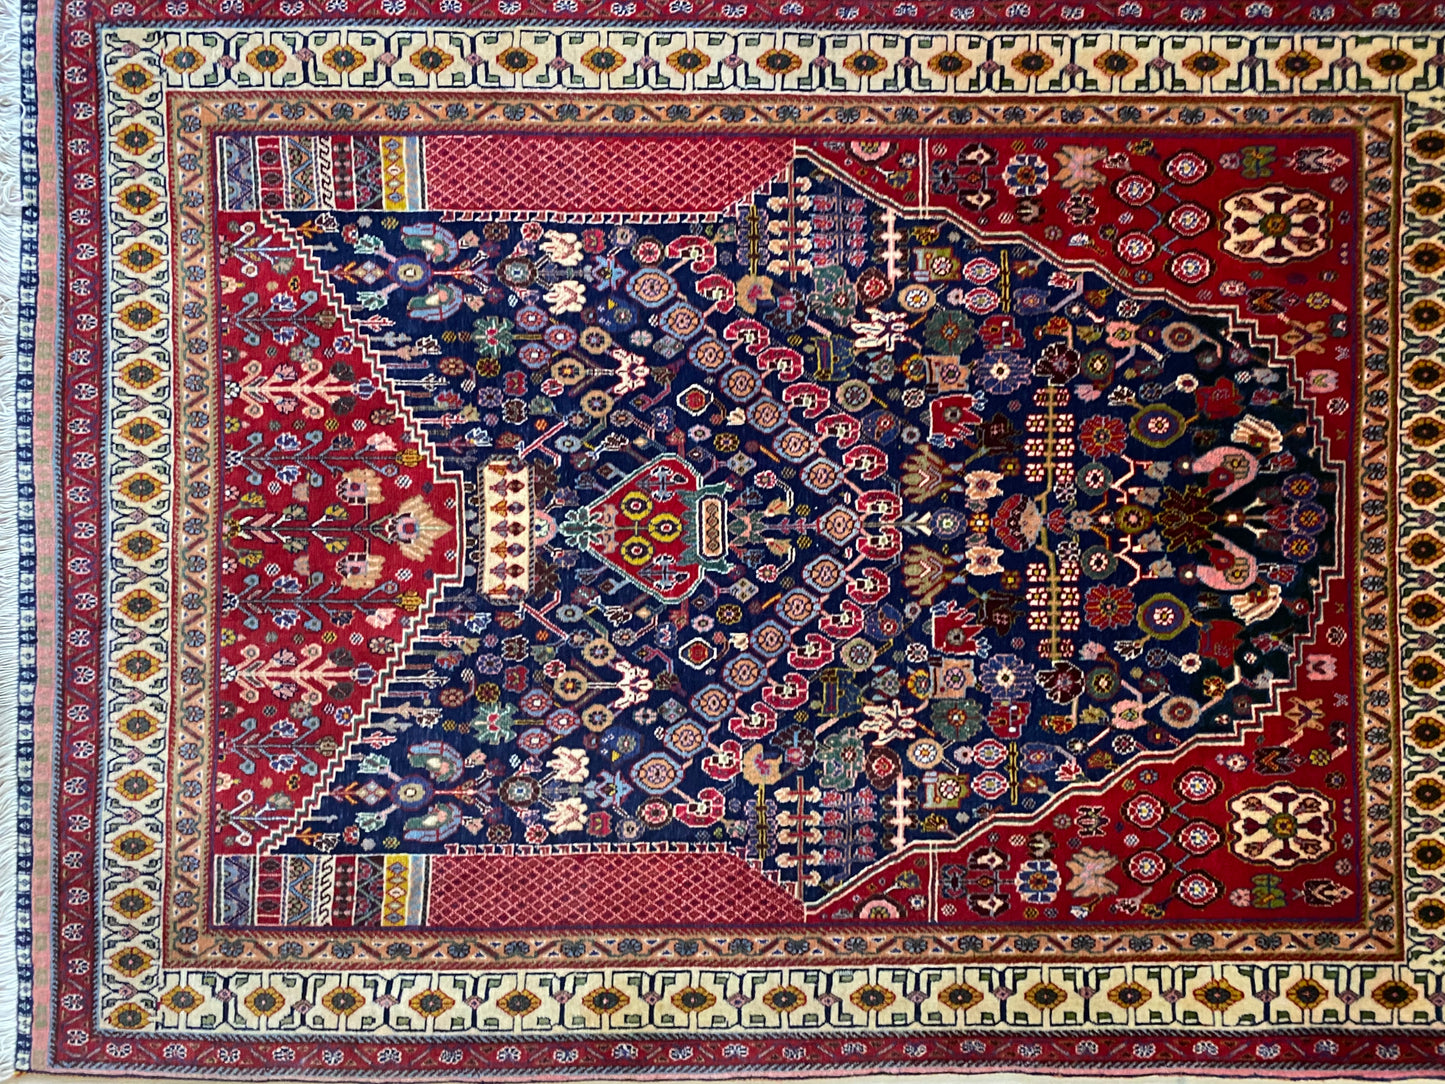 A brand new and very rare Gashgahi nomadic carpet of the highest quality! Size ca 100 x 150 cm.